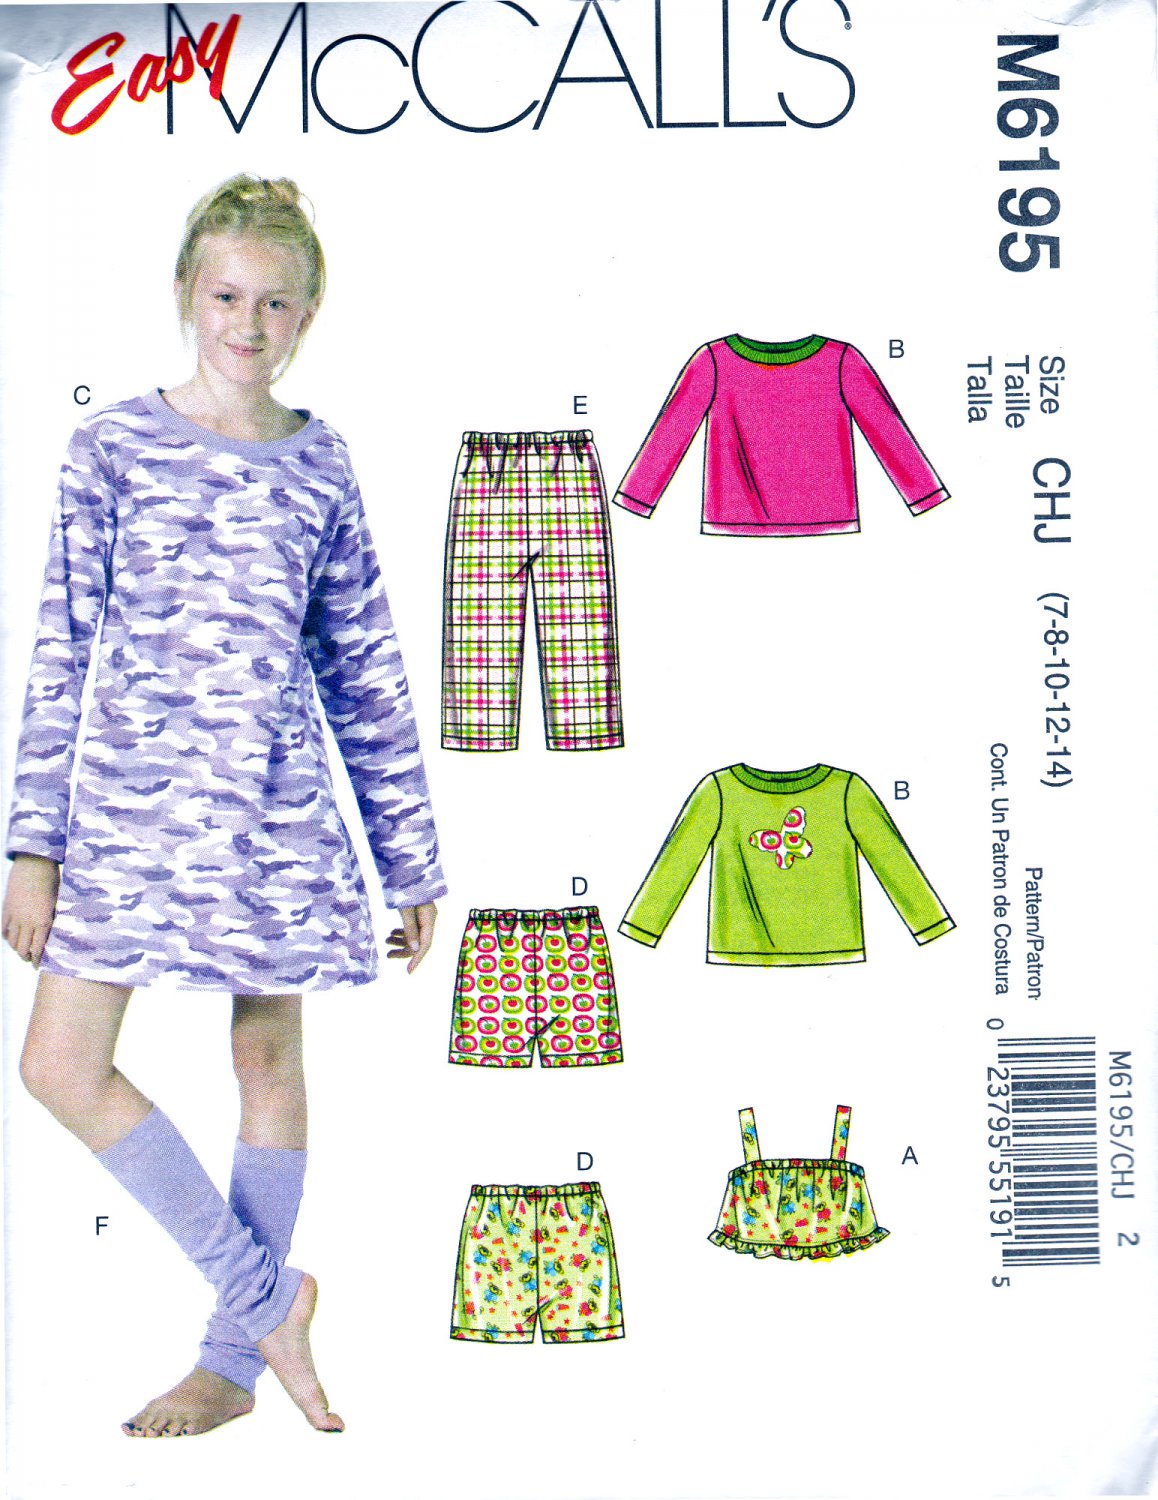 McCall's 6195 M6195 Girls Sewing Pattern Childs Top Gown Shorts Pants Leg Warmers Sizes 7-8-10-12-14